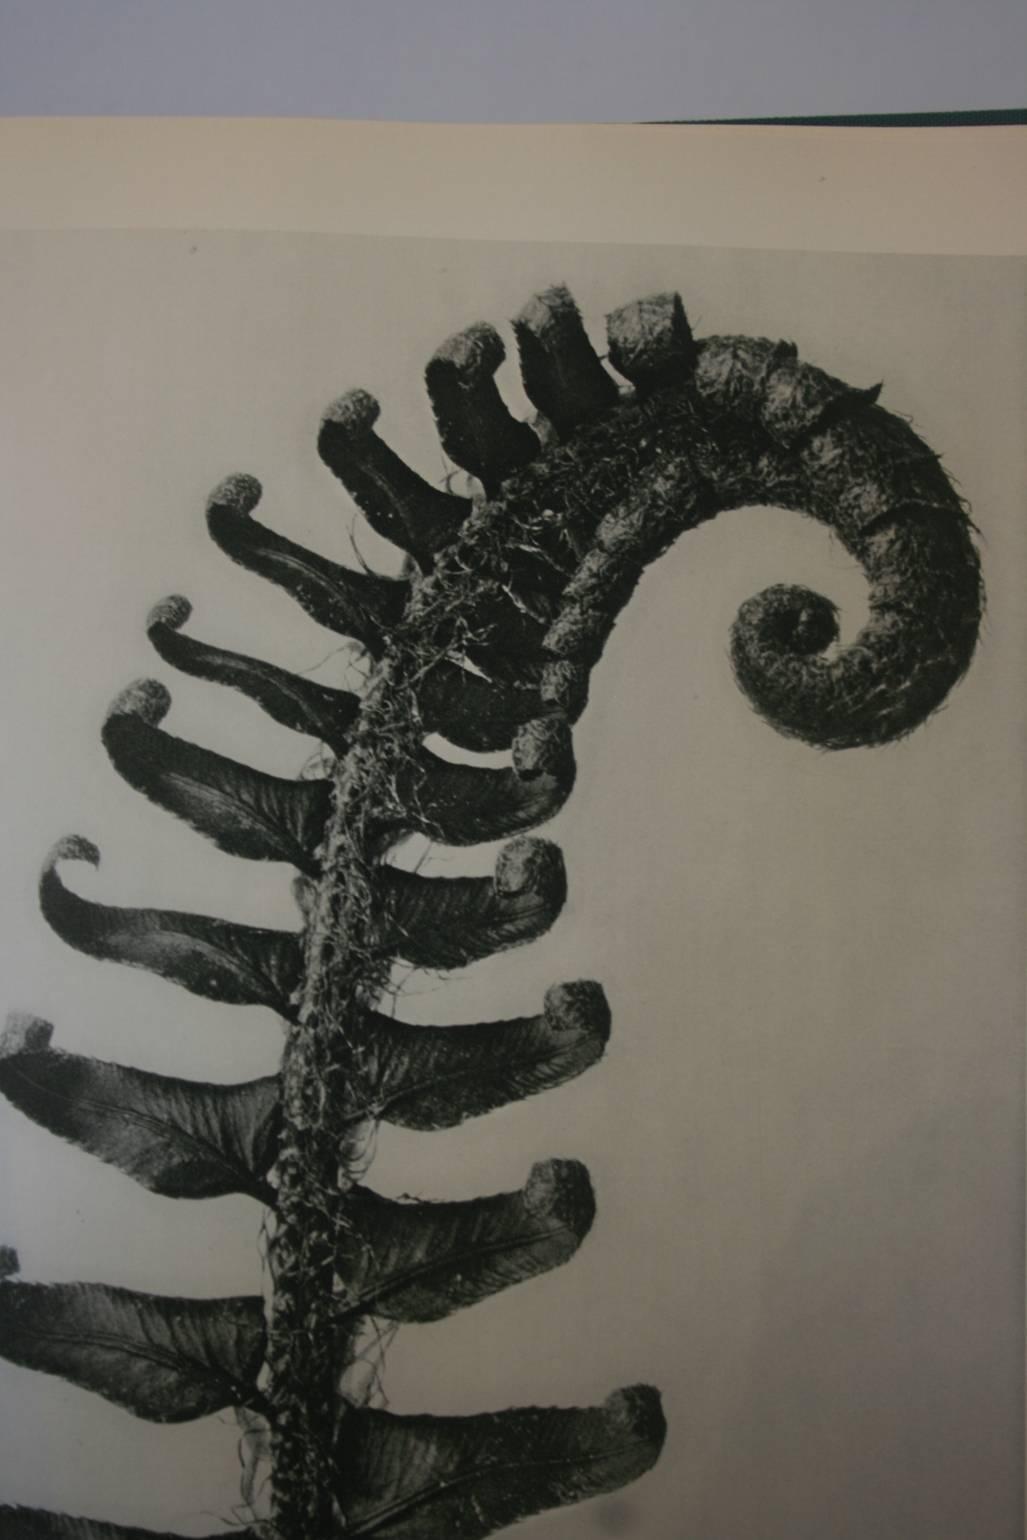 Beautiful first edition Karl Blossfeldt Photogravure image of a Fern. The gravure is archivally matted in a cream matte size 16